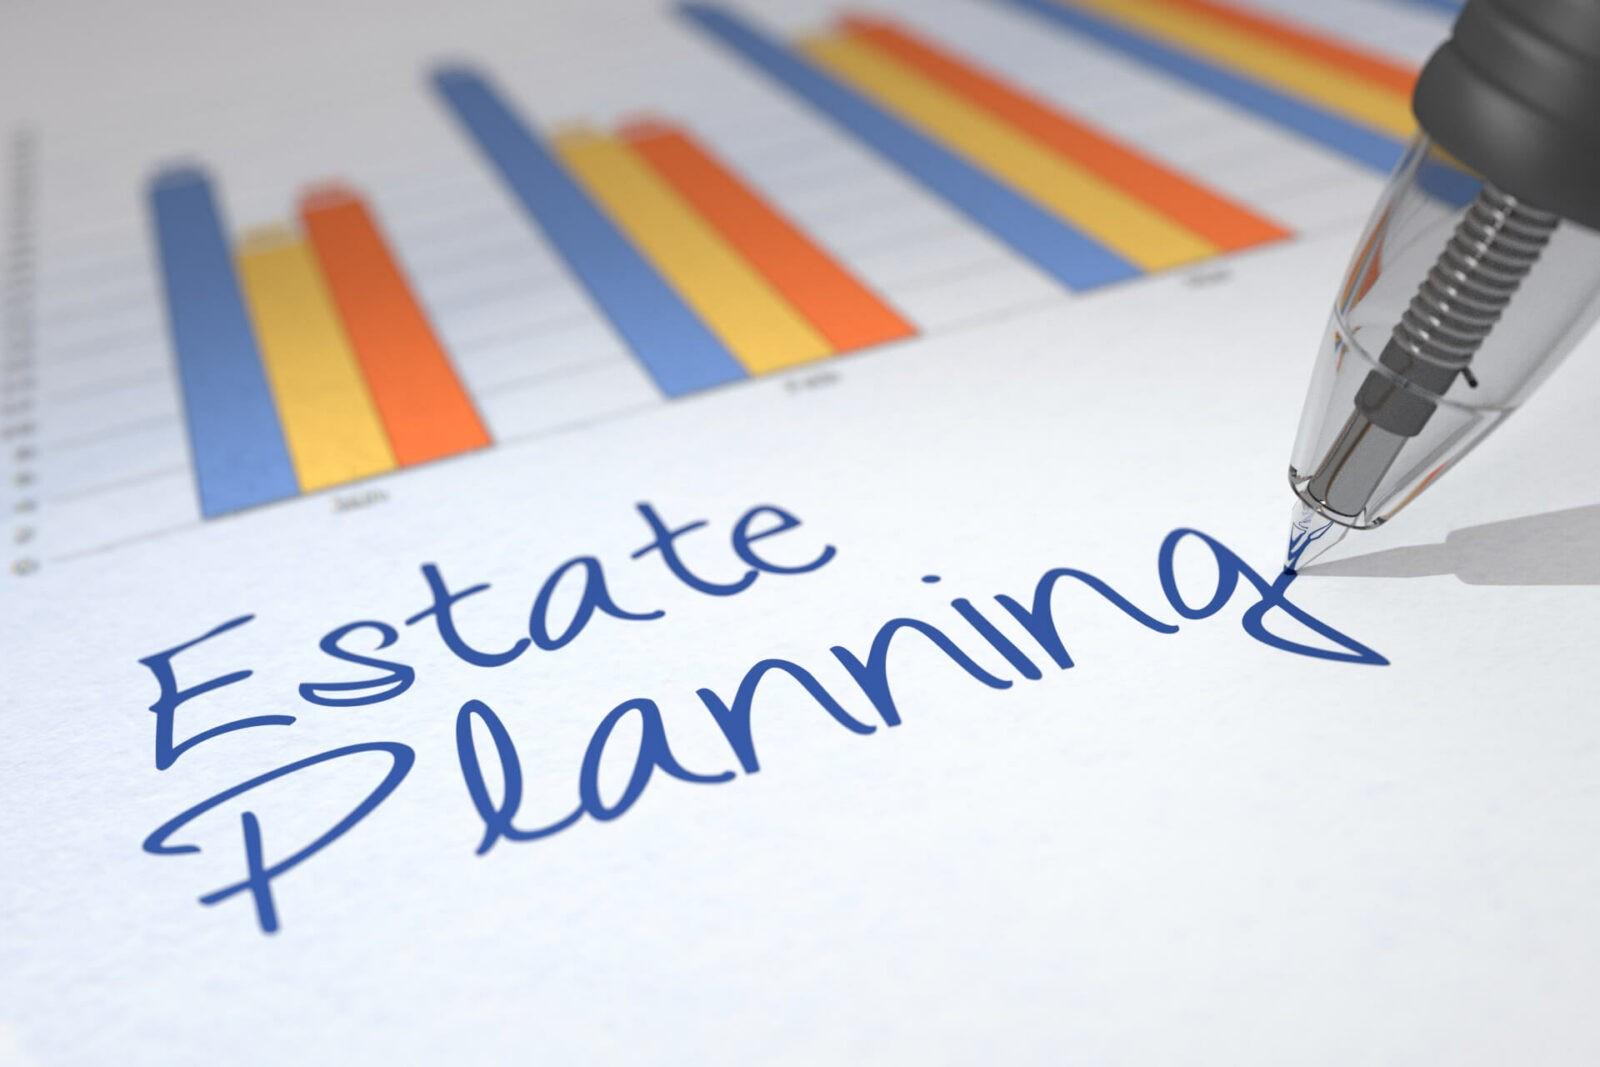 Digital Estate Planning: A Must-Do for the Modern Age